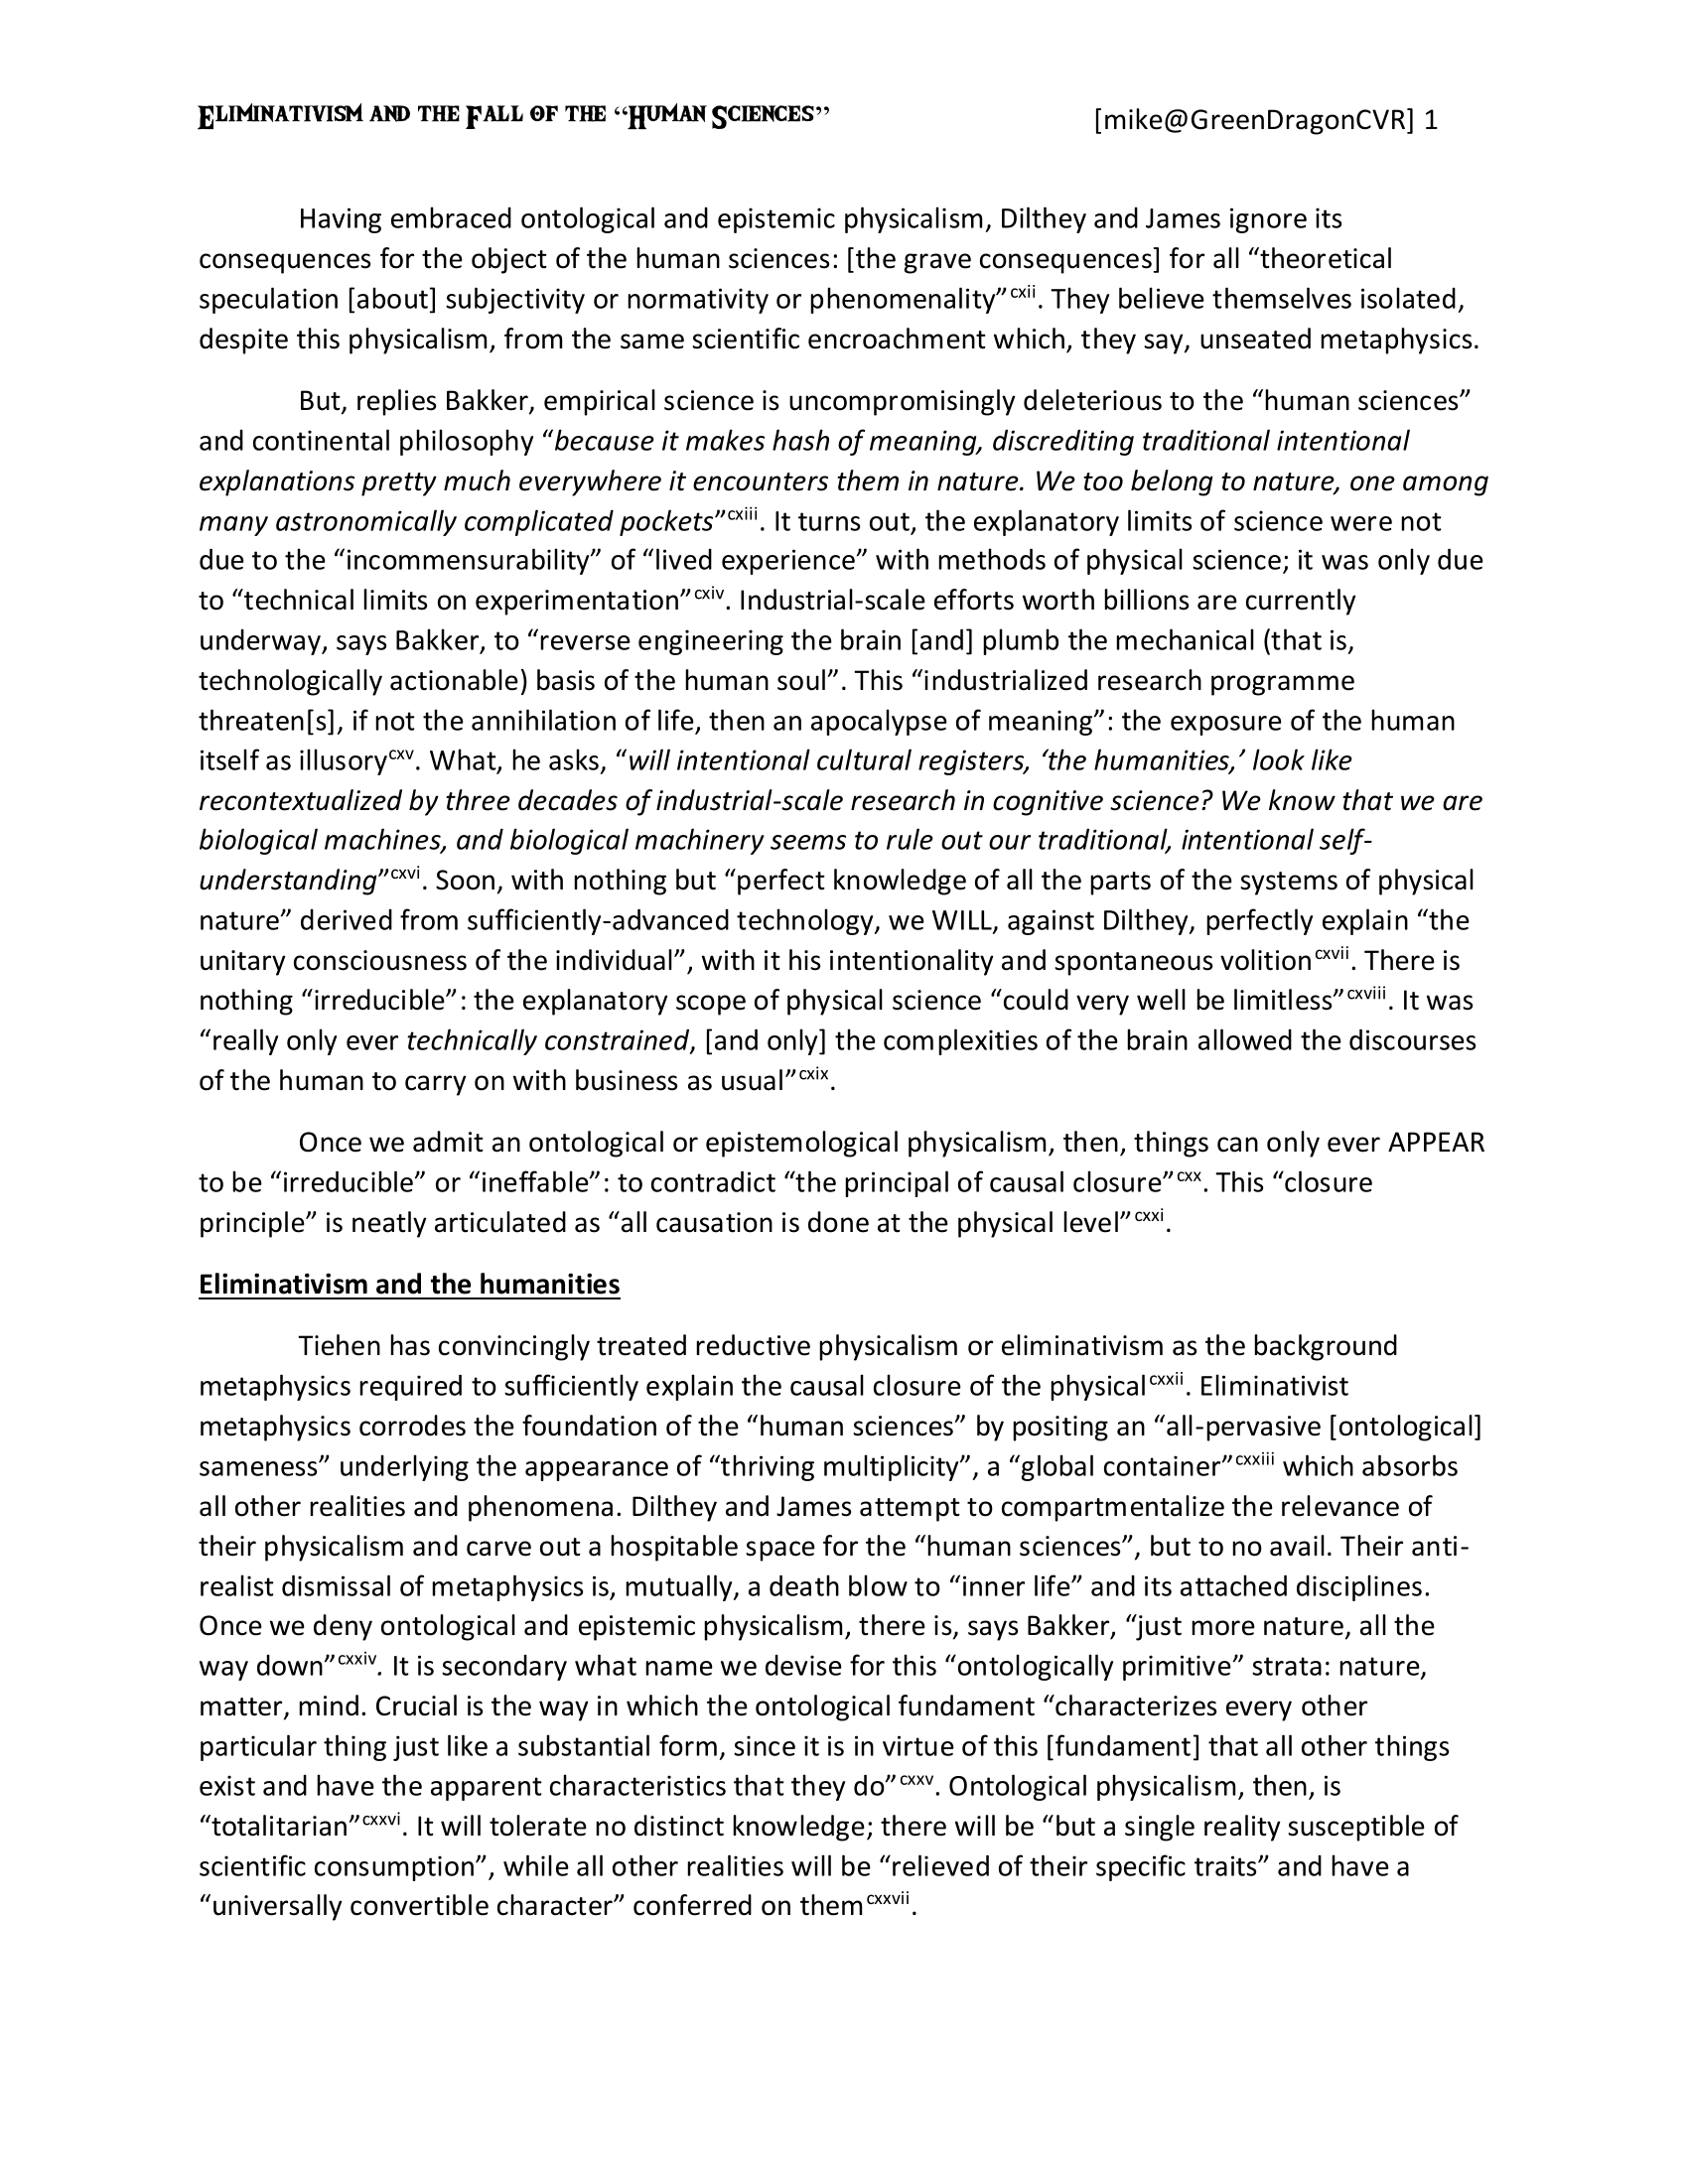 Eliminativism and the Fall of the Human Sciences-08.png